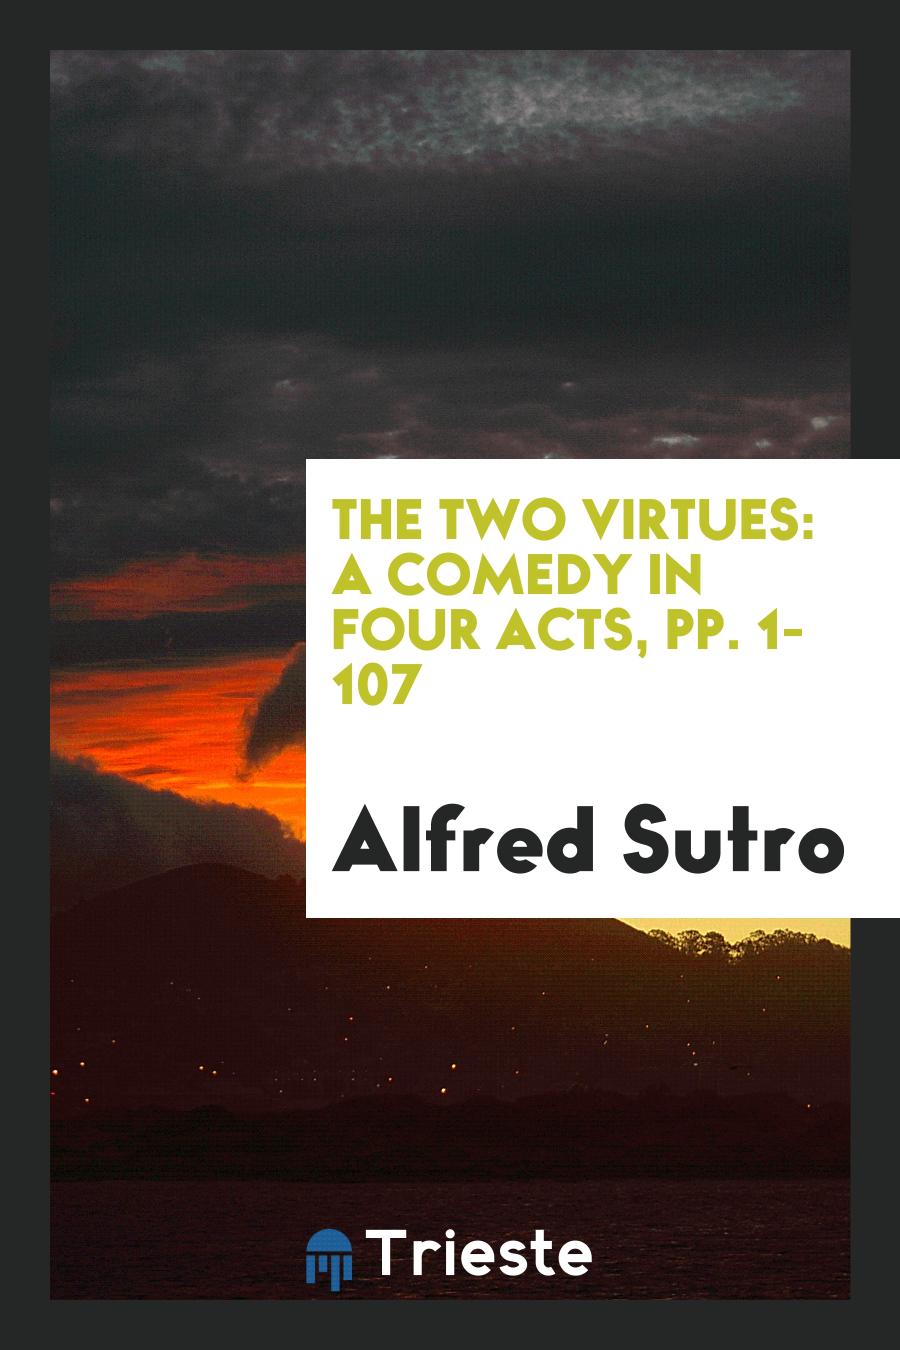 The Two Virtues: A Comedy in Four Acts, pp. 1-107